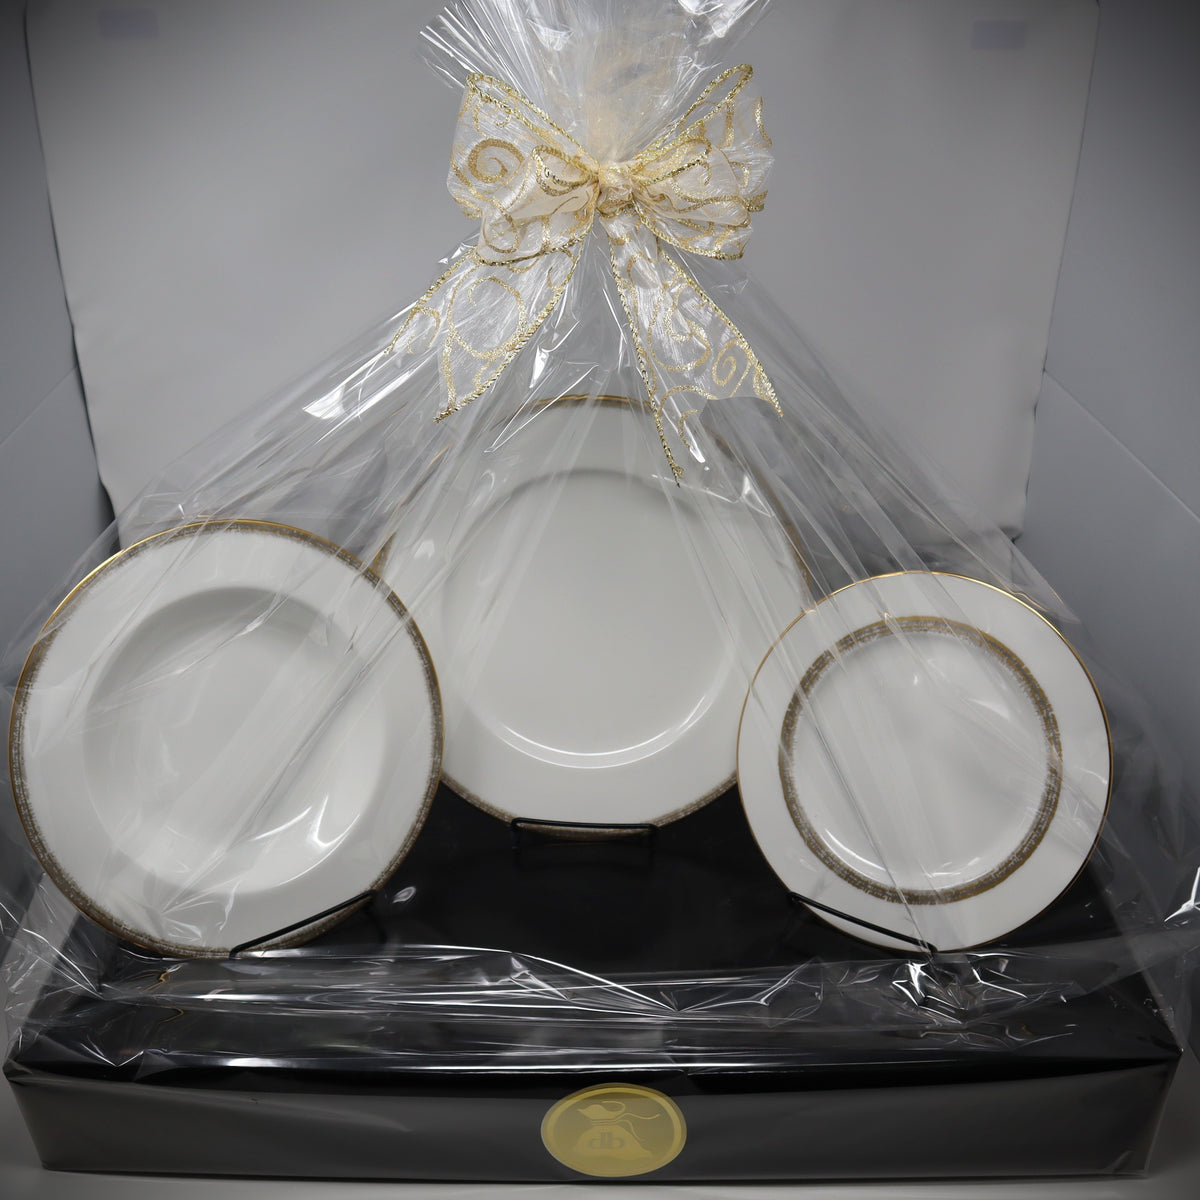 Vort Gift Wrapped - Haku Dishes, Service for 4